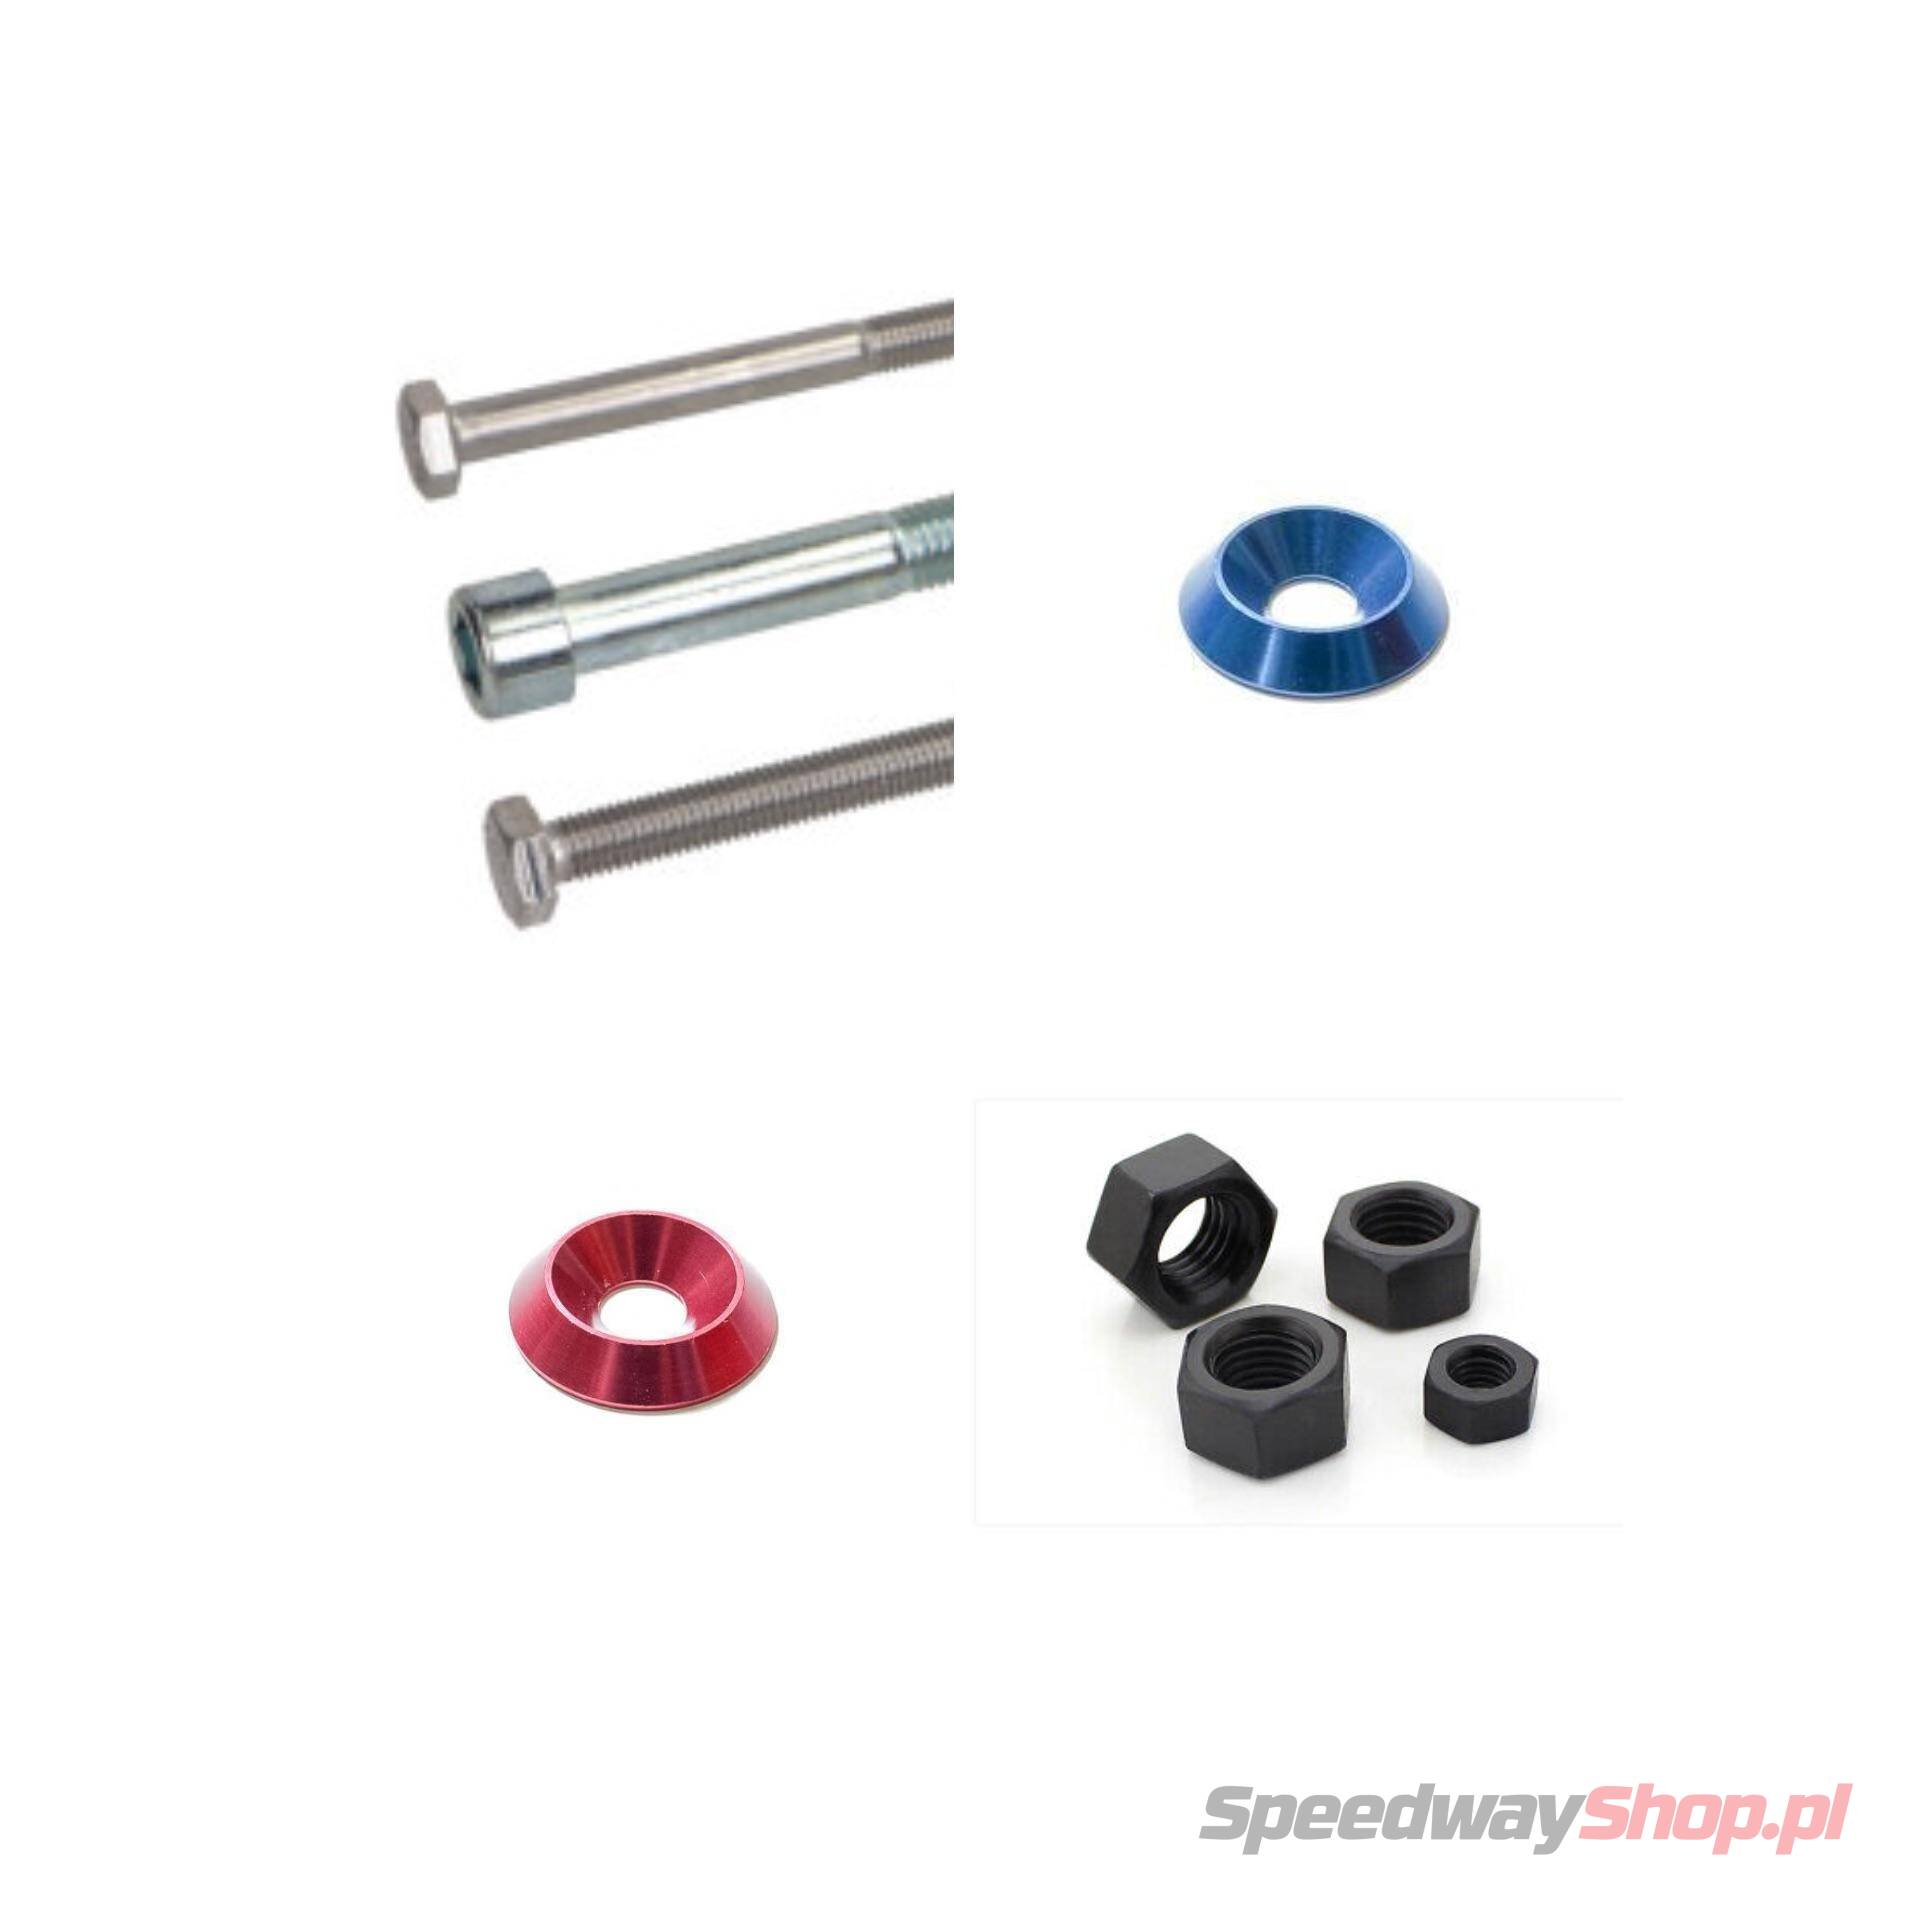 Bolts, nuts, frame washers